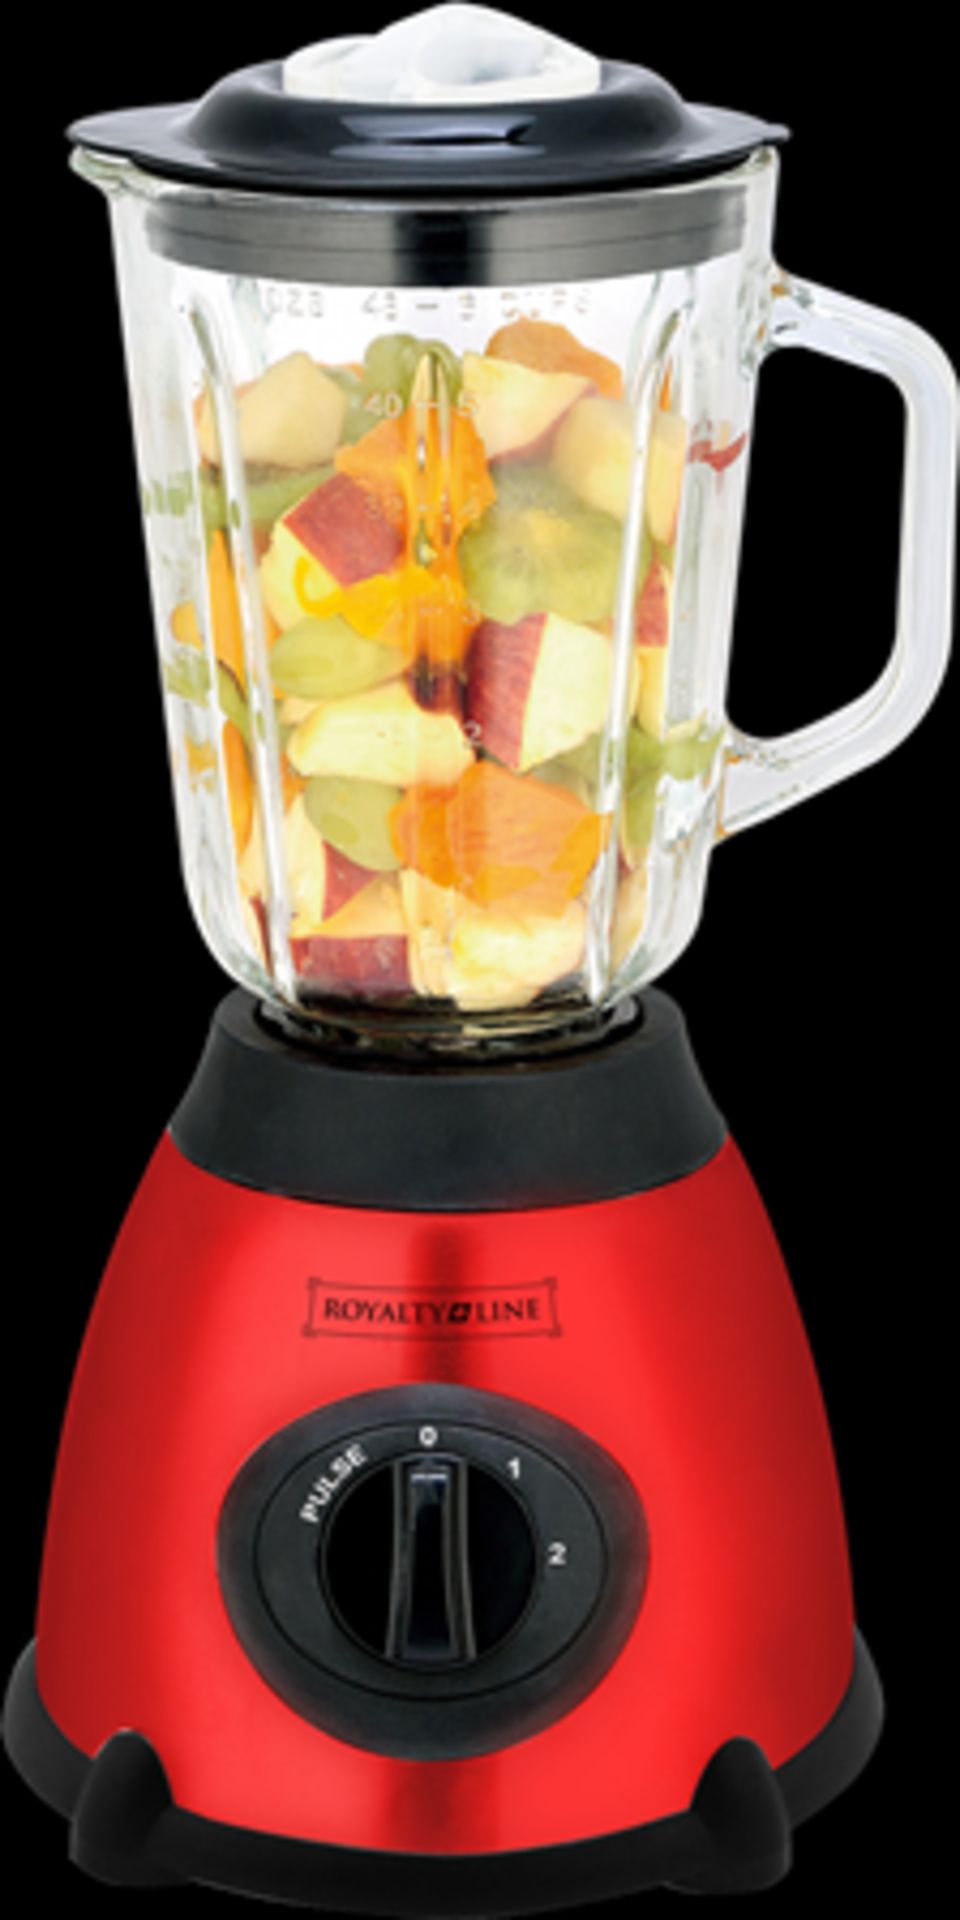 V Brand New Blender Mixer with Grinder and Grinding Cup - 1.5l Large Capacity - Ice Crusher Function - Image 2 of 2